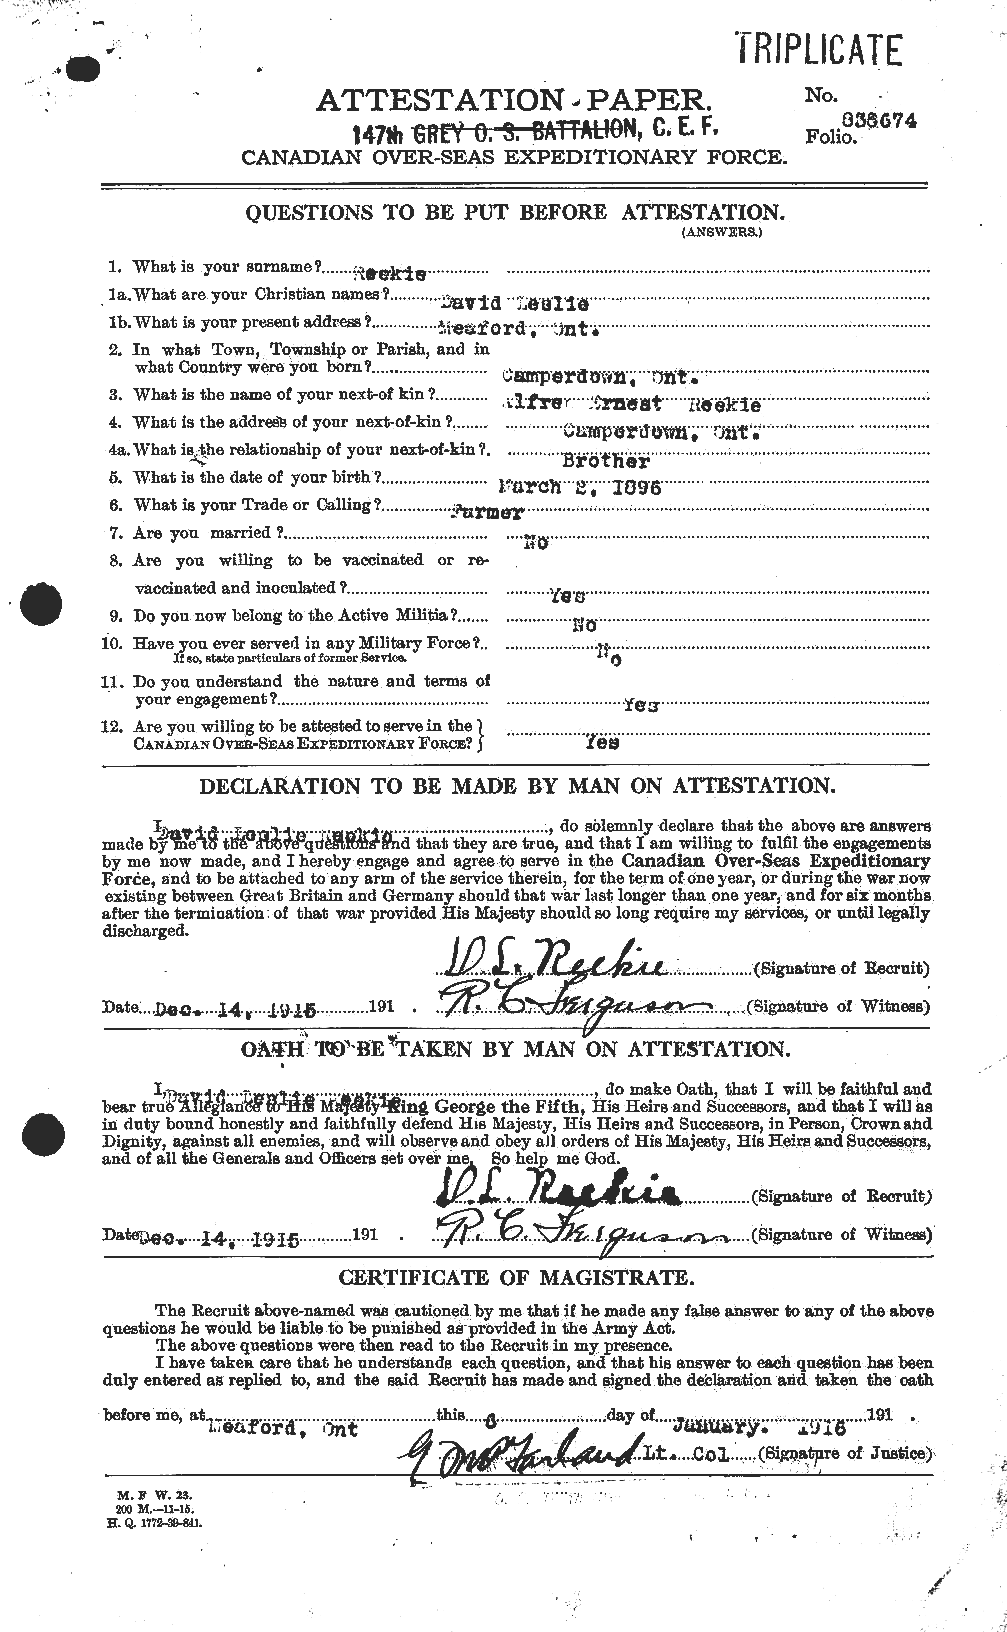 Personnel Records of the First World War - CEF 596610a